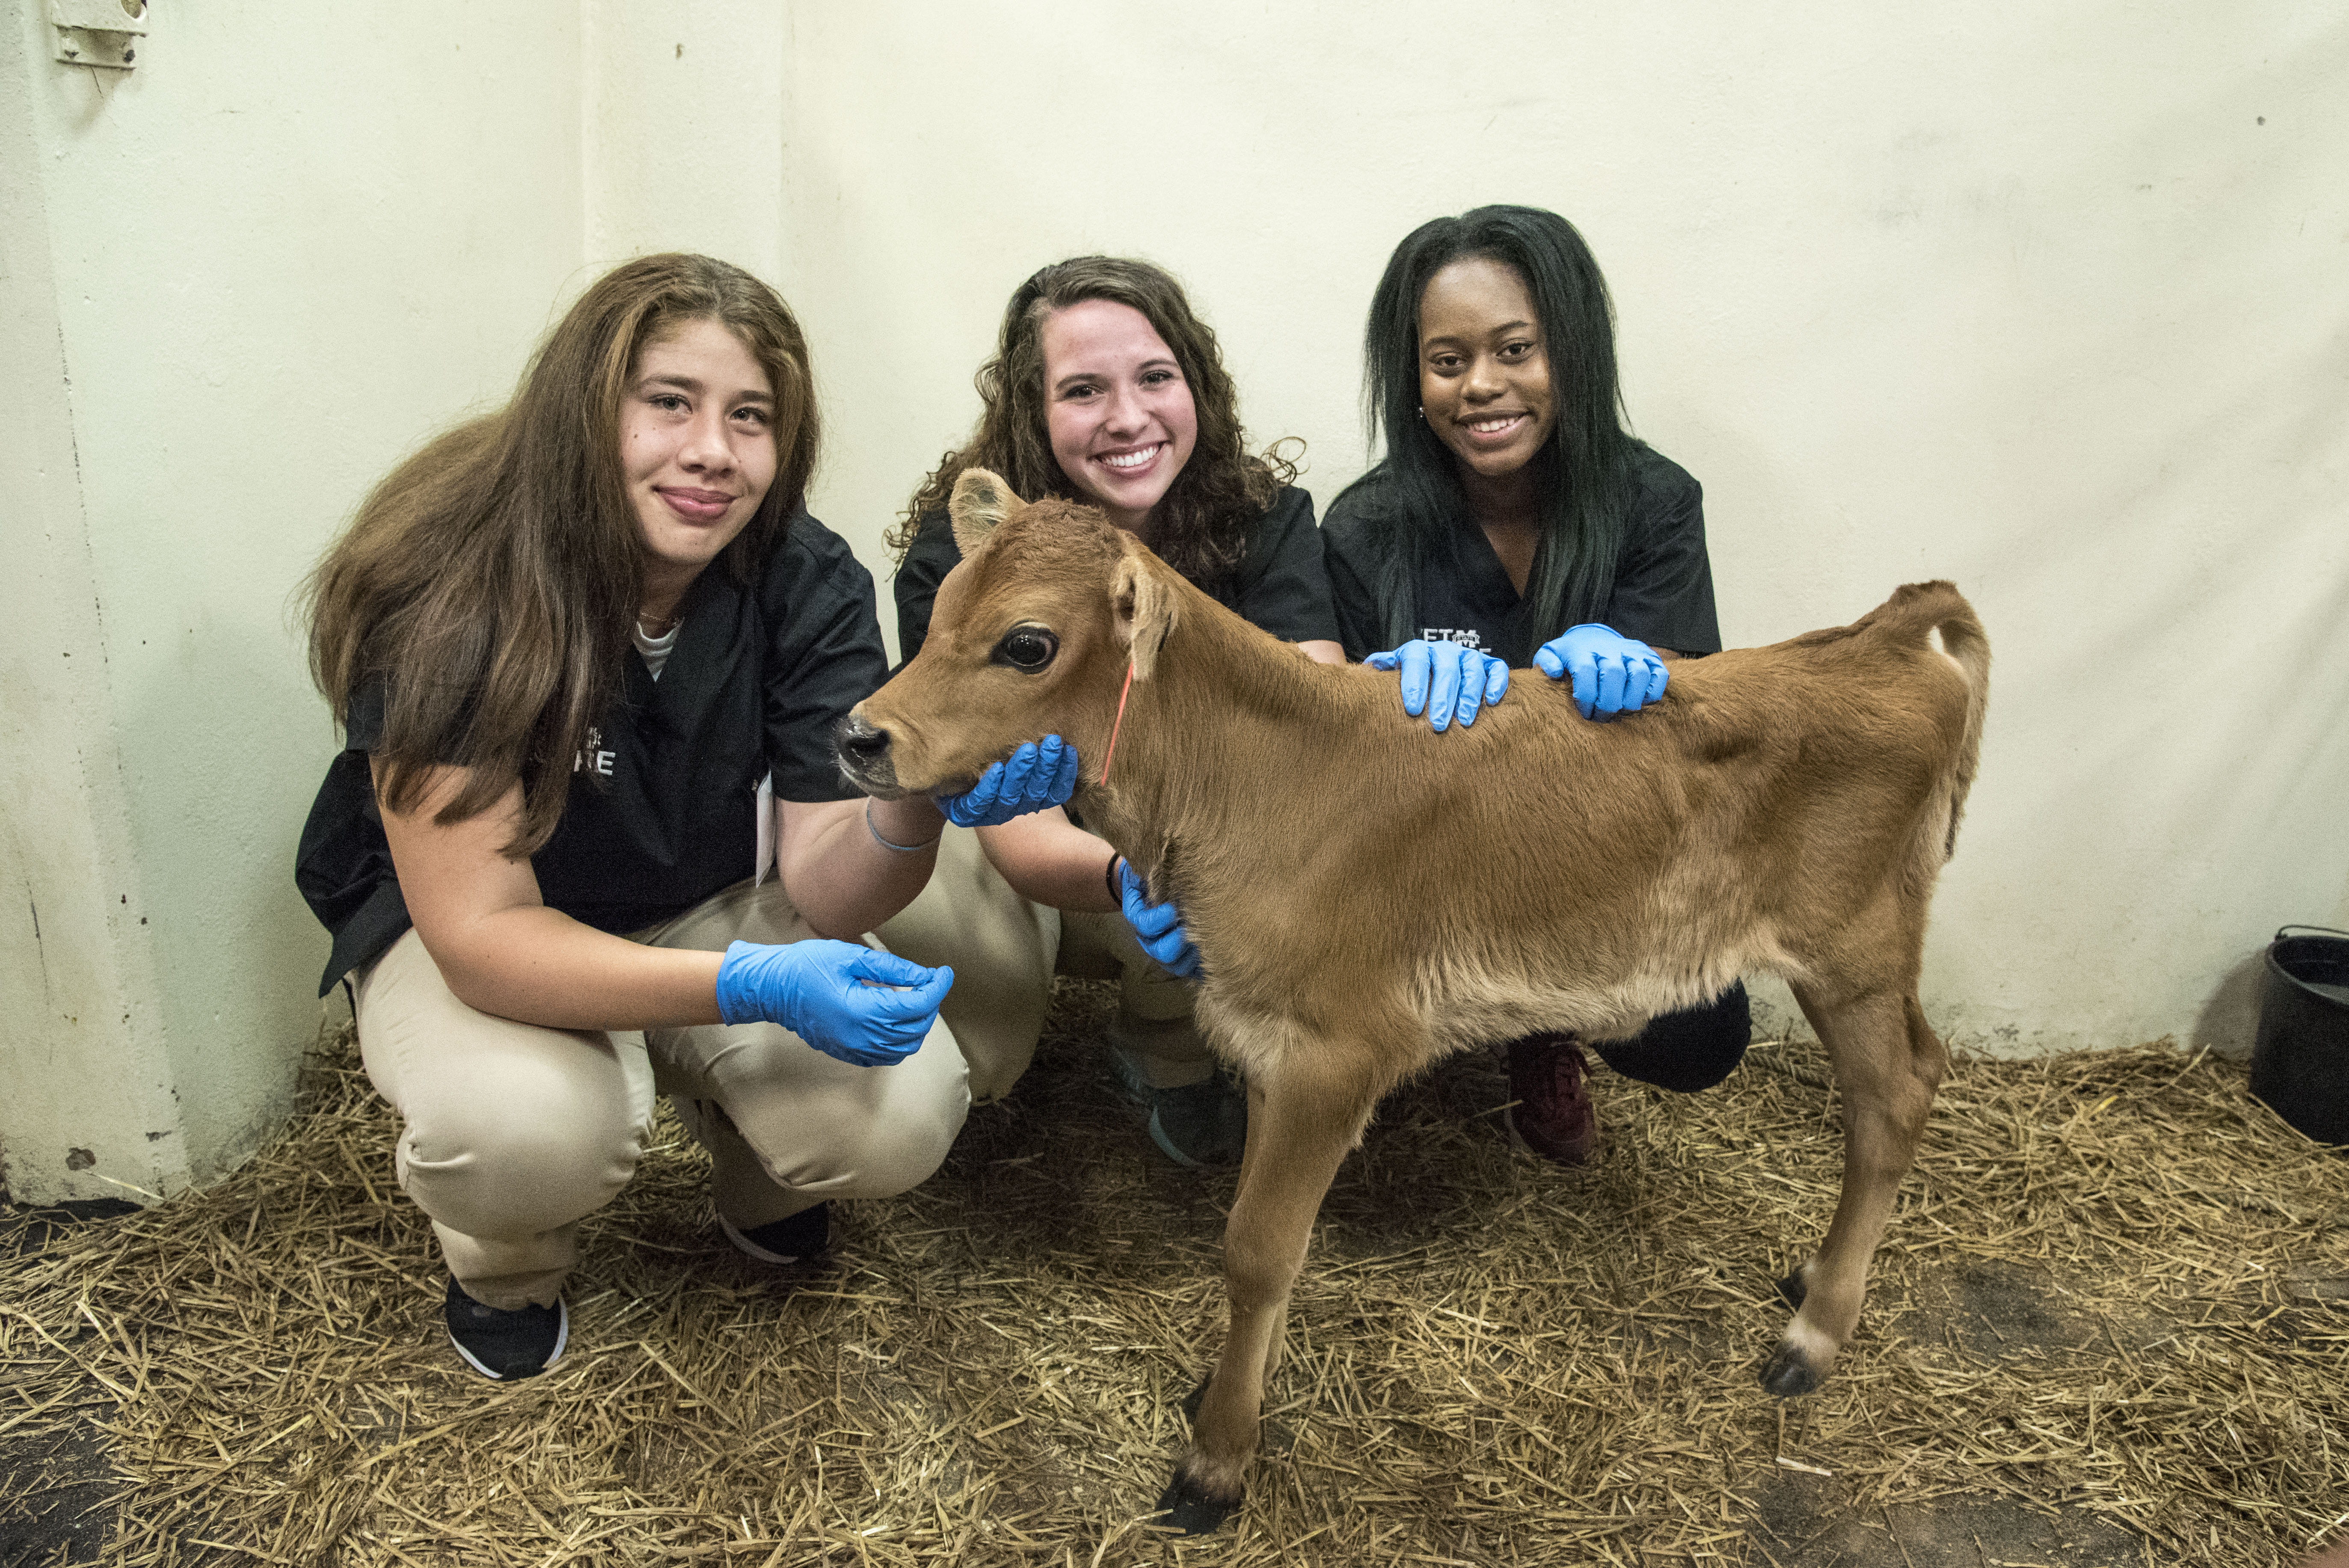 Students pose with a calf